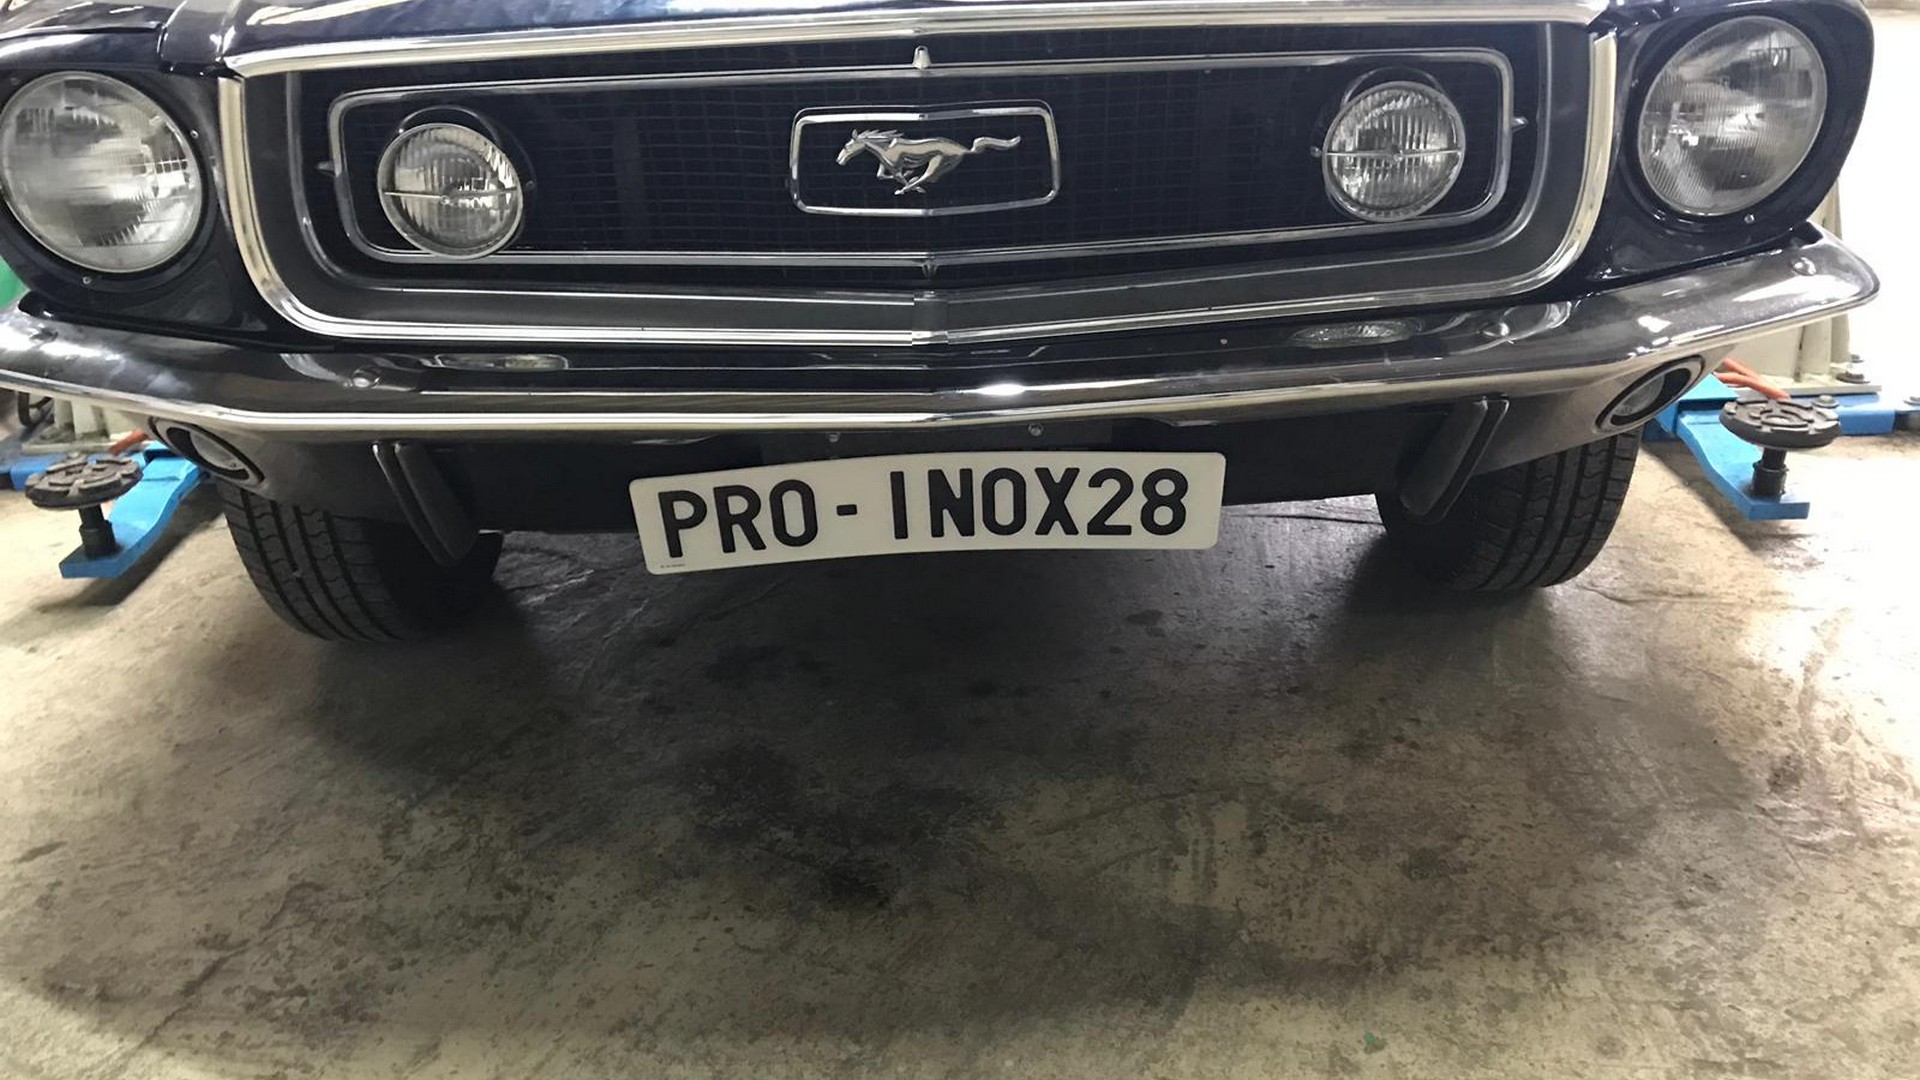 Proinox28- Échappement Ford Mustang V8 1967